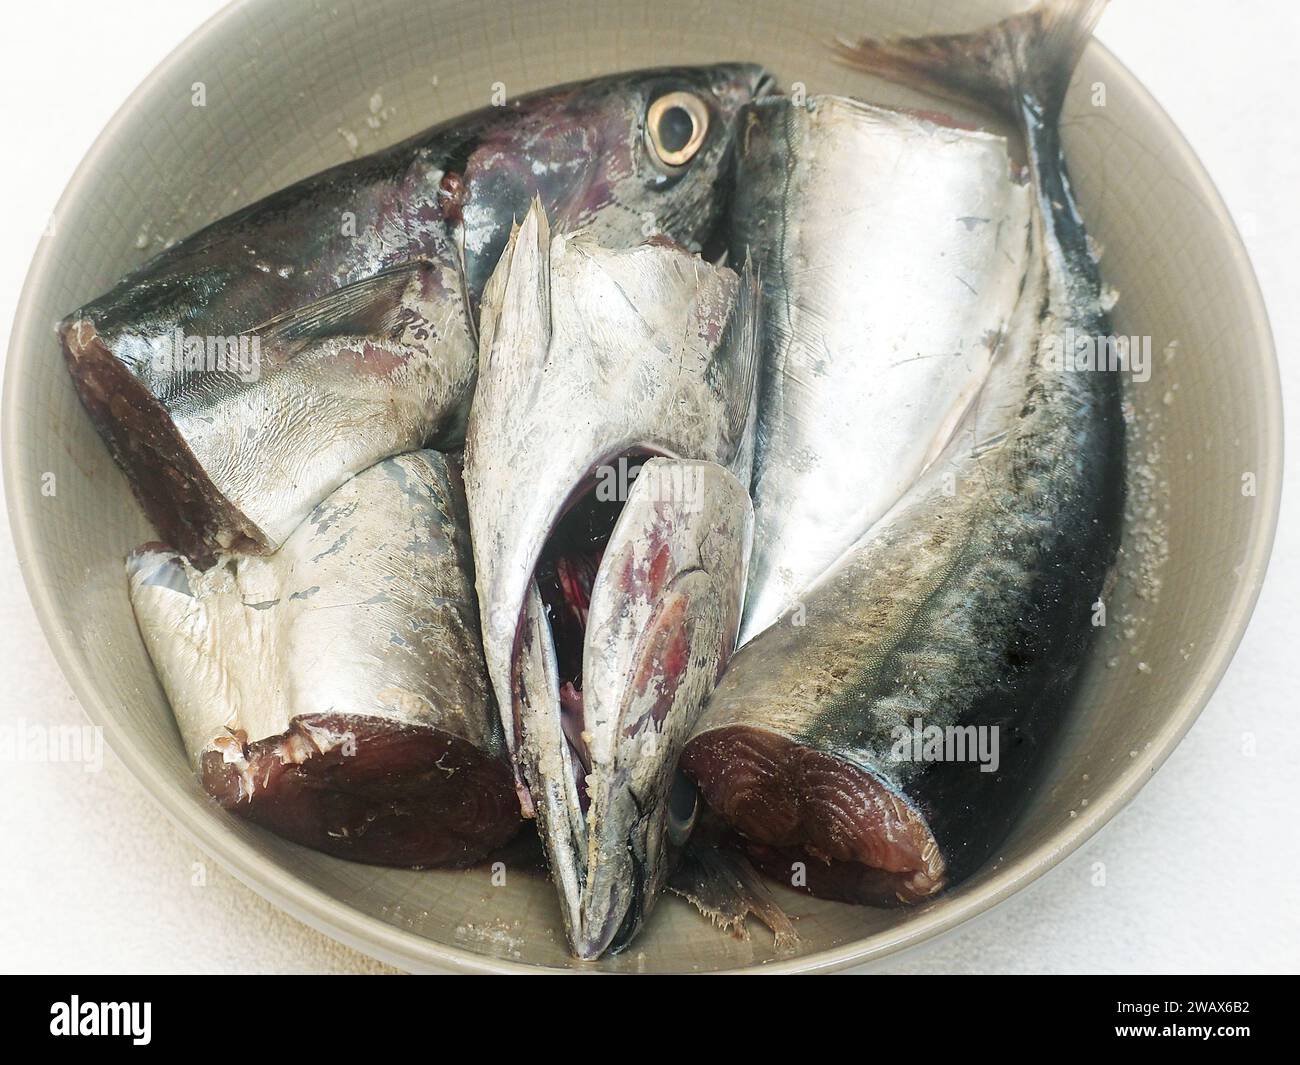 preparing for cooking, cutting mackerel tuna fish in ceramic bowl marinate with salt and pepper Stock Photo